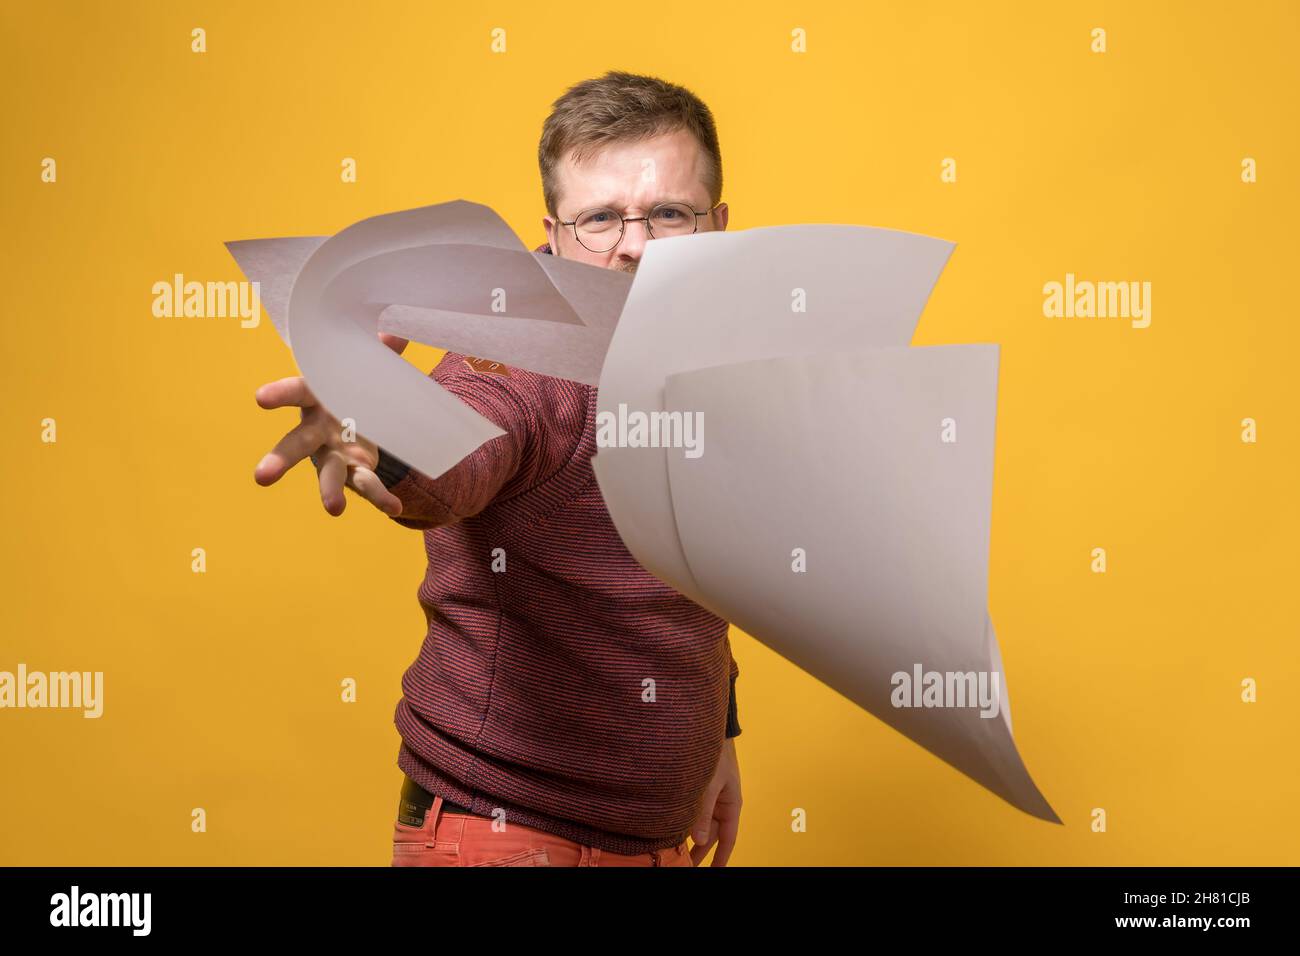 Man in stress and anger throws a stack of white paper forward. Bad working day. Psychological concept.  Stock Photo